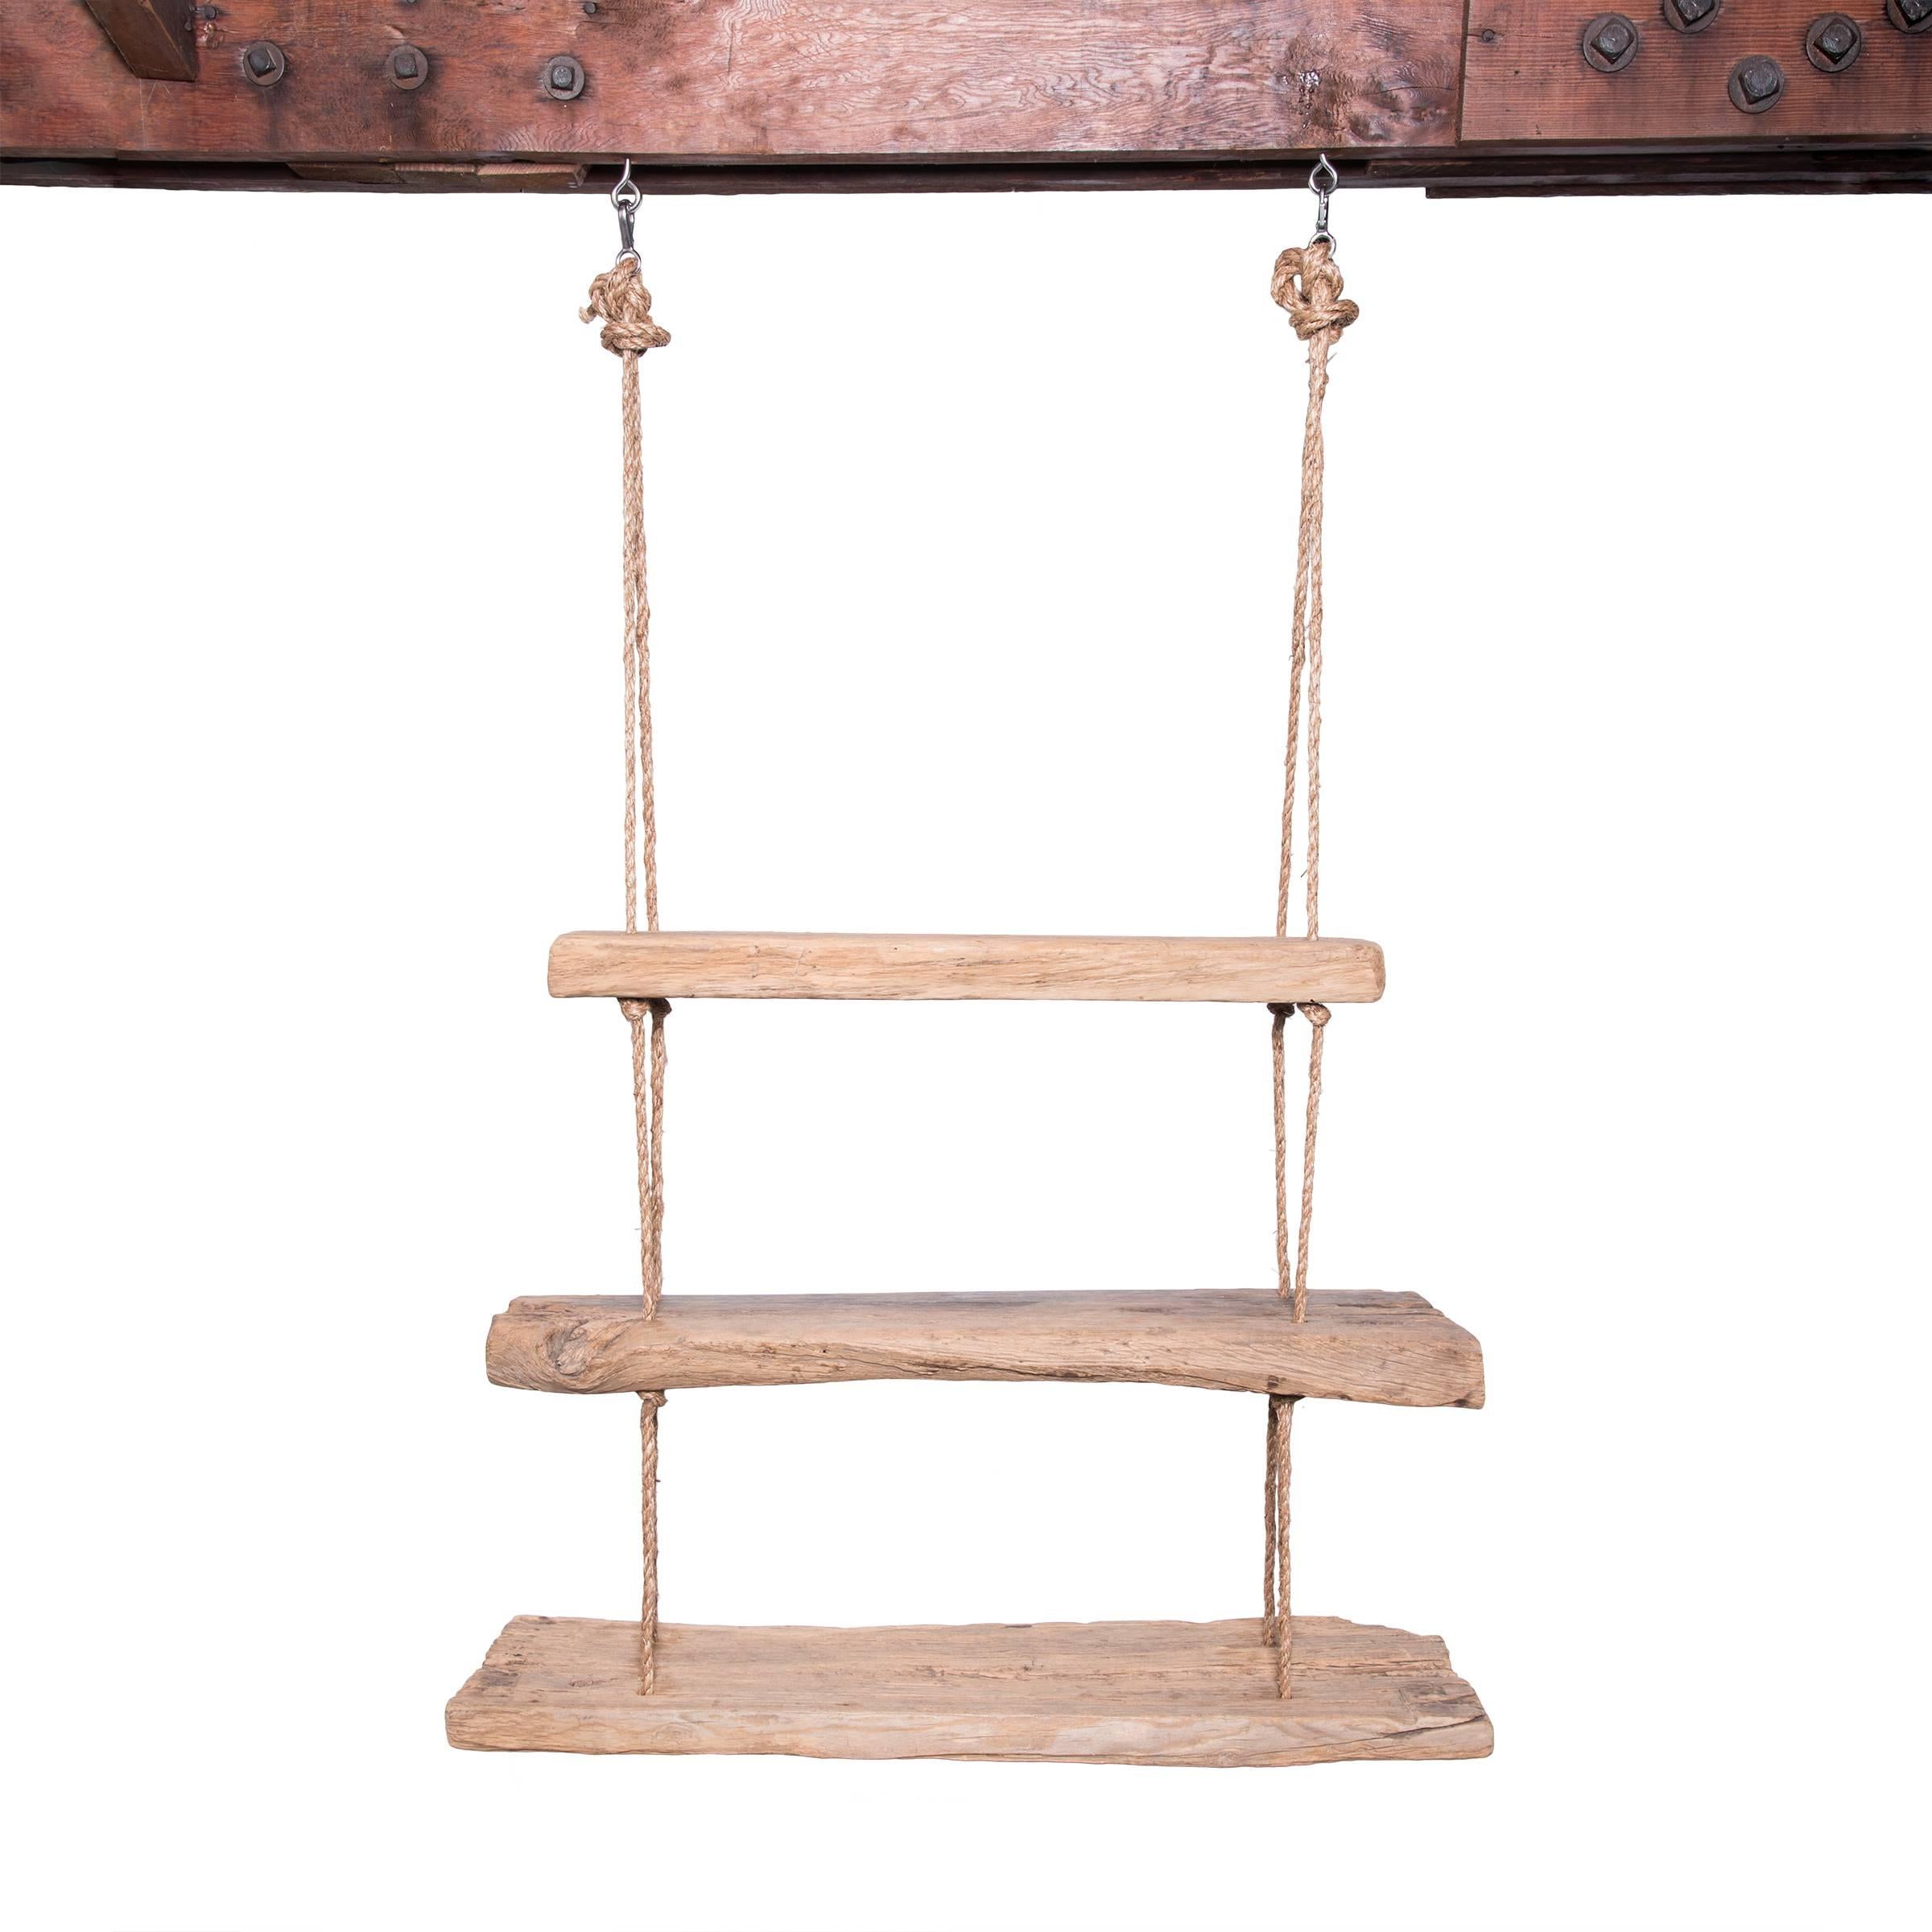 Timbers of reclaimed wood find new purpose as a suspended shelf. Tiered together with thick hemp rope, the rustic shelves are rich with character developed over time. Sturdy enough to support books or decorative objects, the shelves could also serve